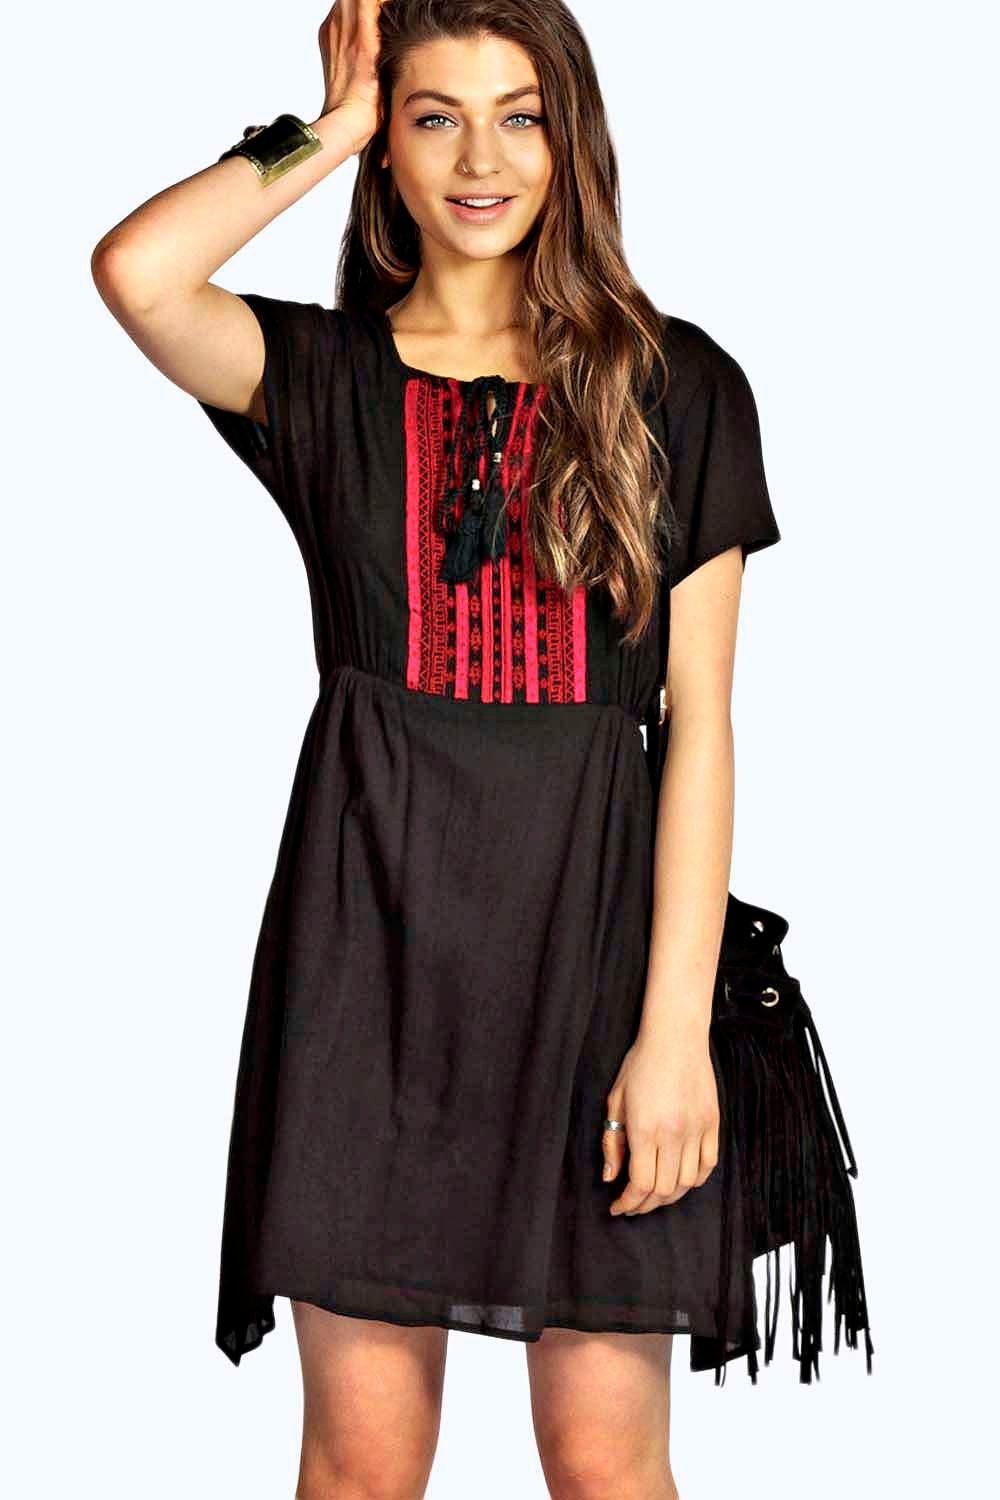 Amy Embroidered Skater Dress at boohoo.com